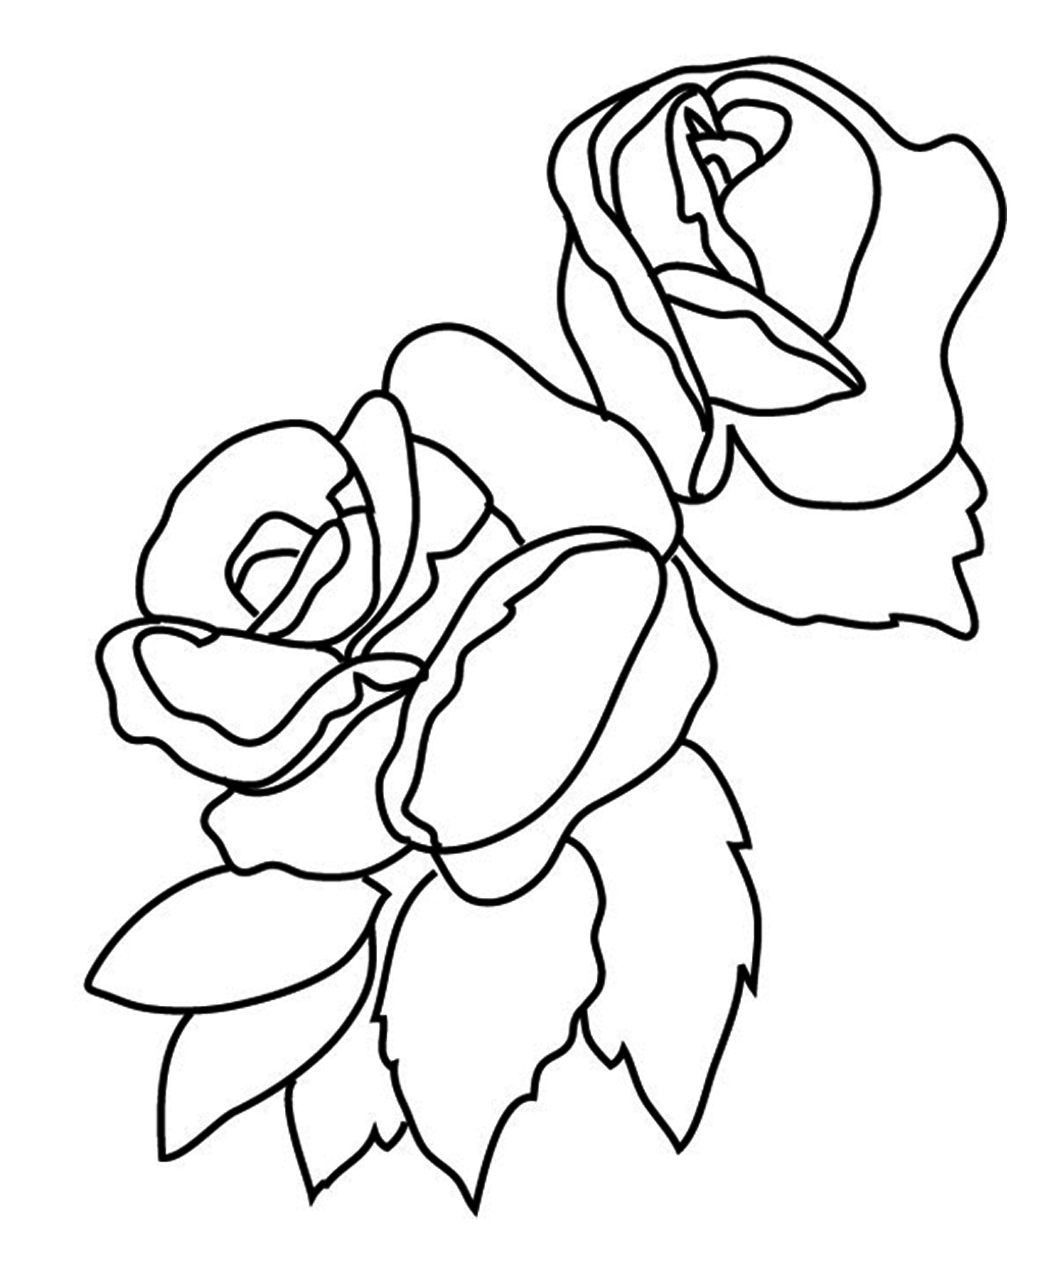 Plants and Flowers Colouring Book  Monkey Pen Store